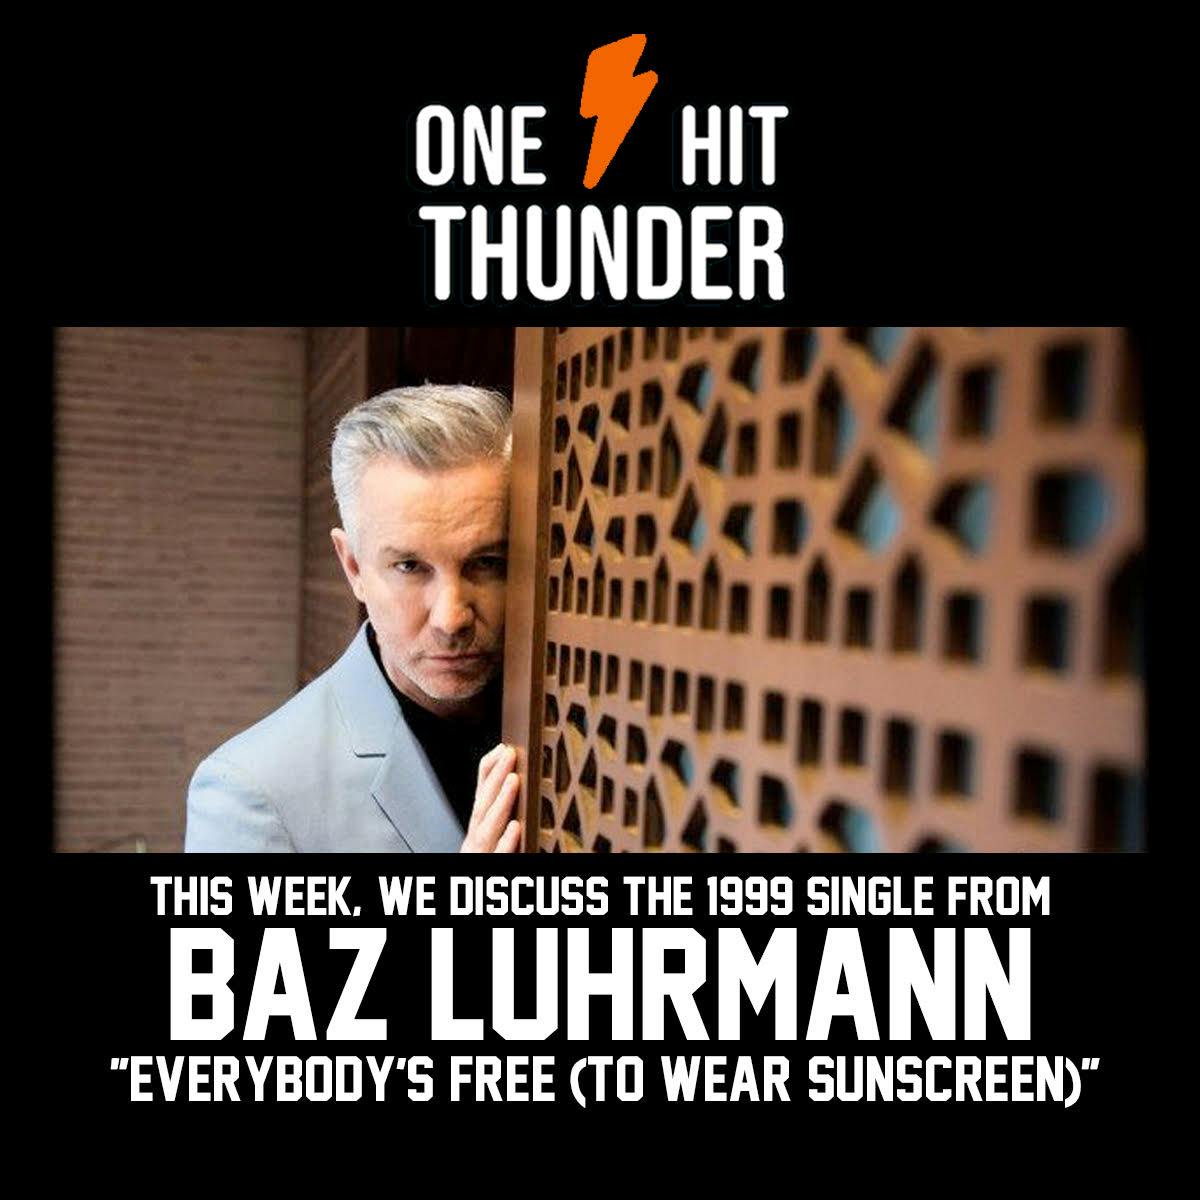 ”Everybody’s Free (To Wear Sunscreen)” by Baz Luhrman